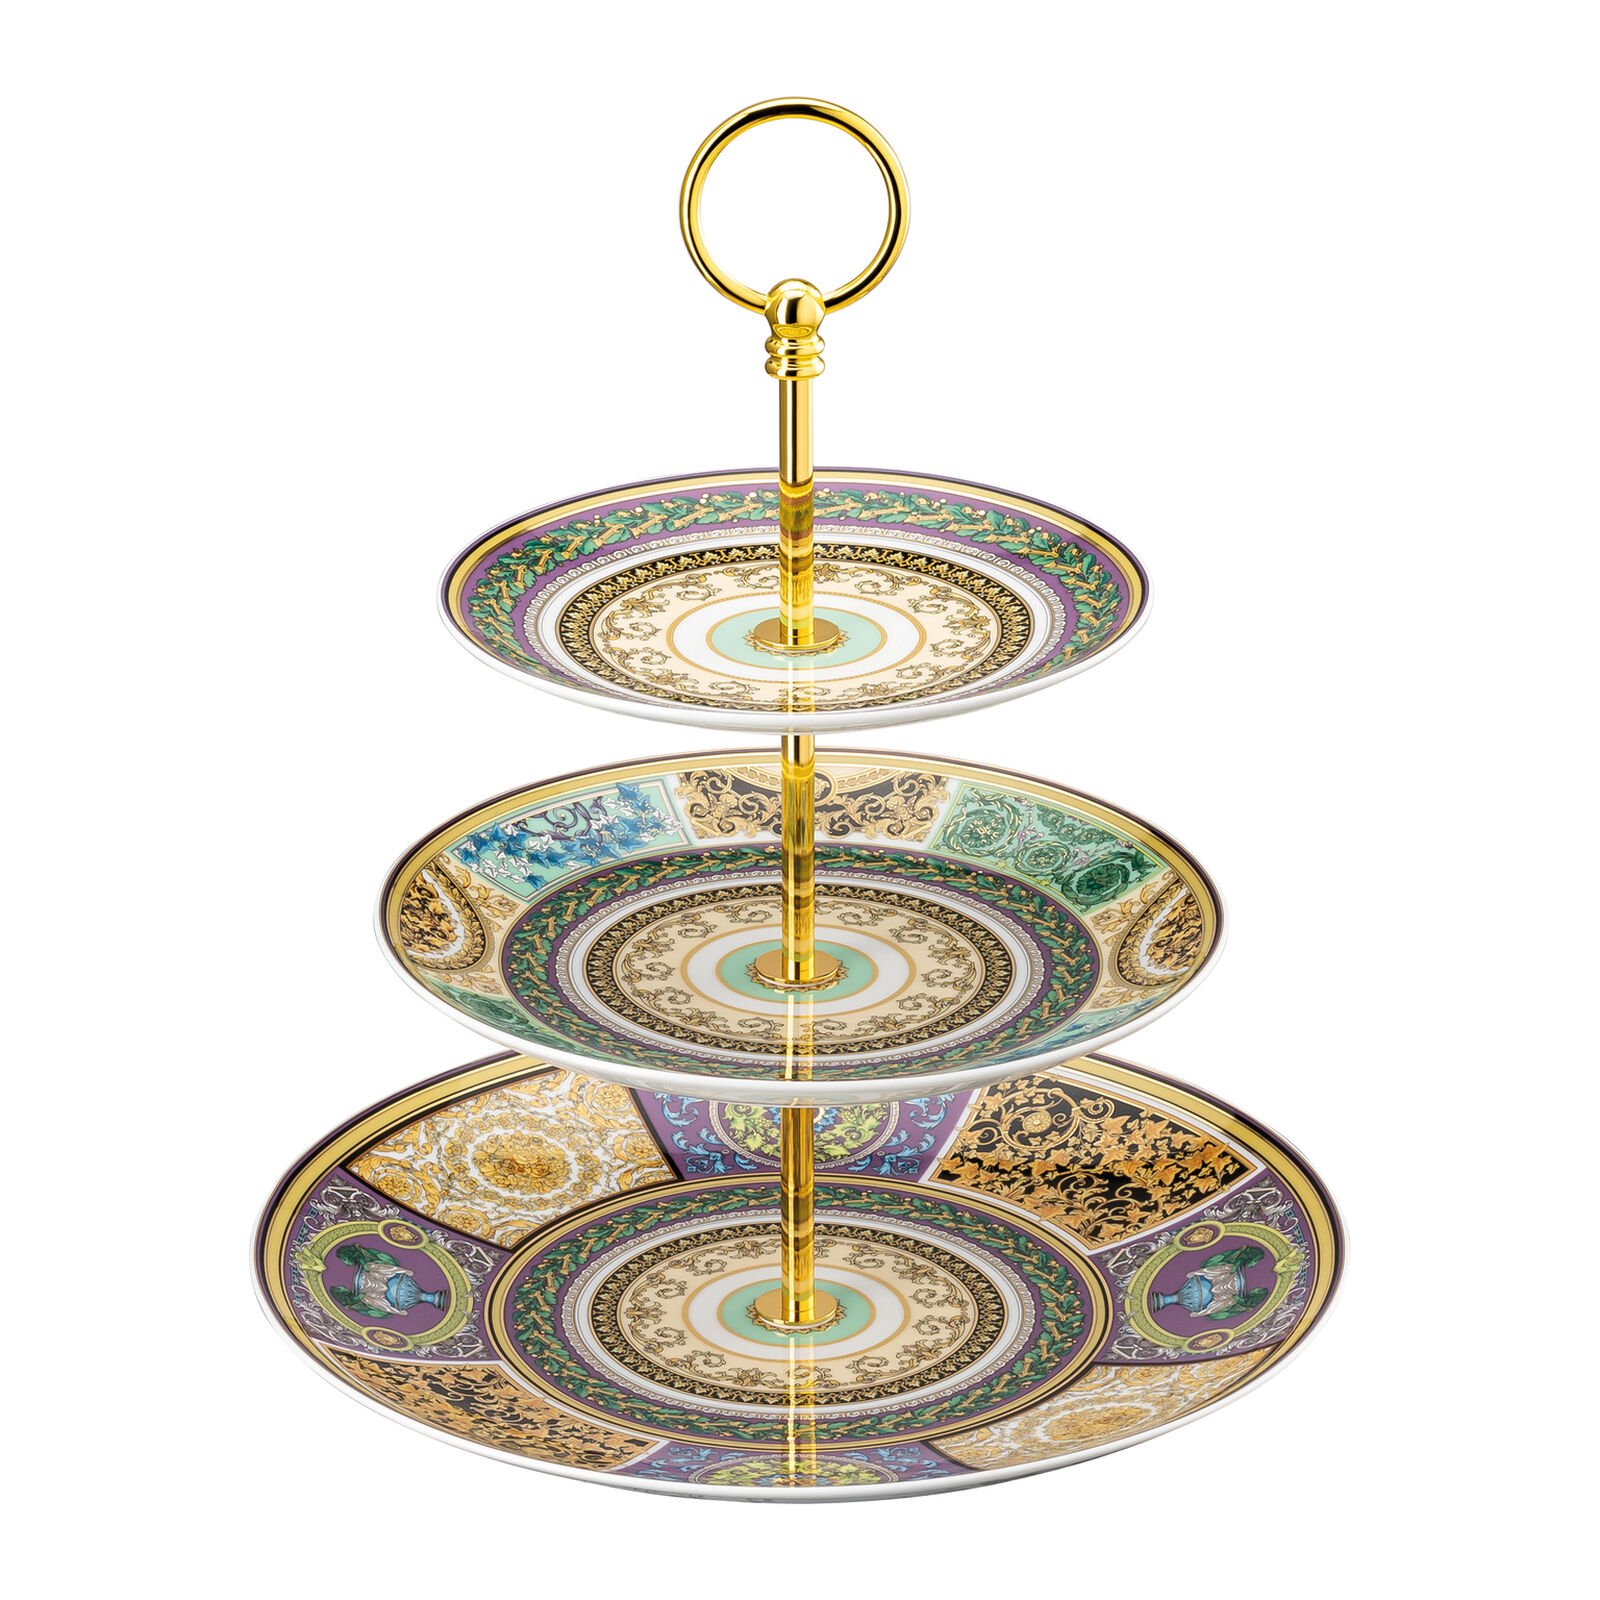 Versace Rosenthal Barocco Mosaic etagere 3 tiers